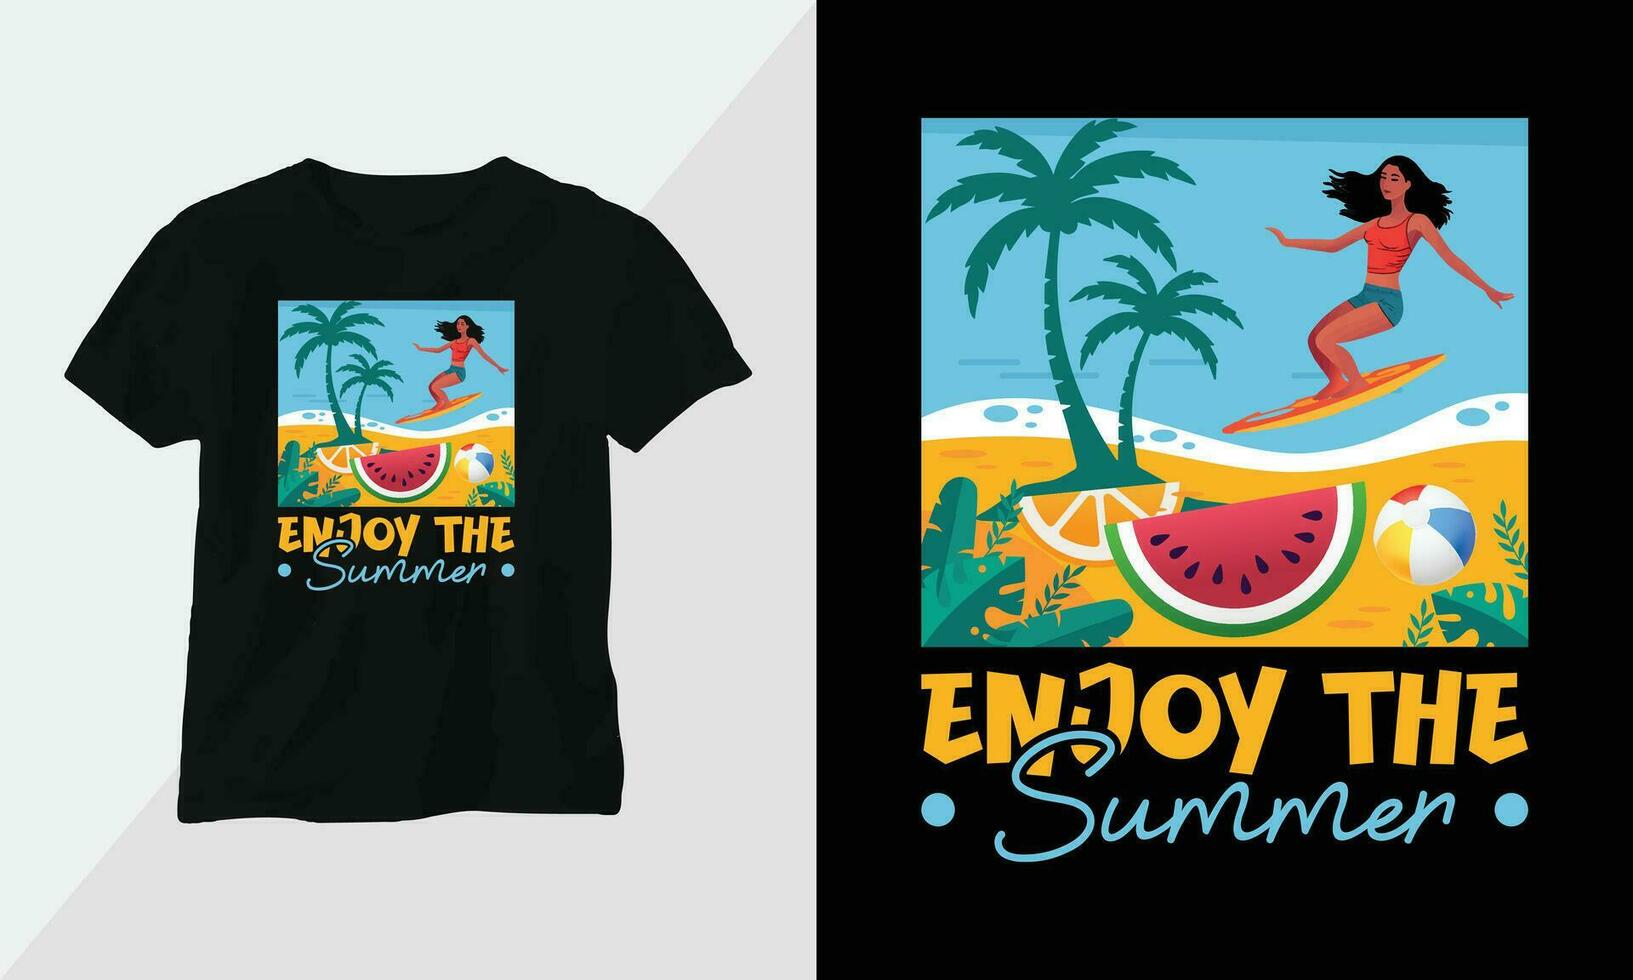 Summer Surfing t-shirt design concept. all designs are colorful and created using Surfboard, beach, summer, sea, etc vector